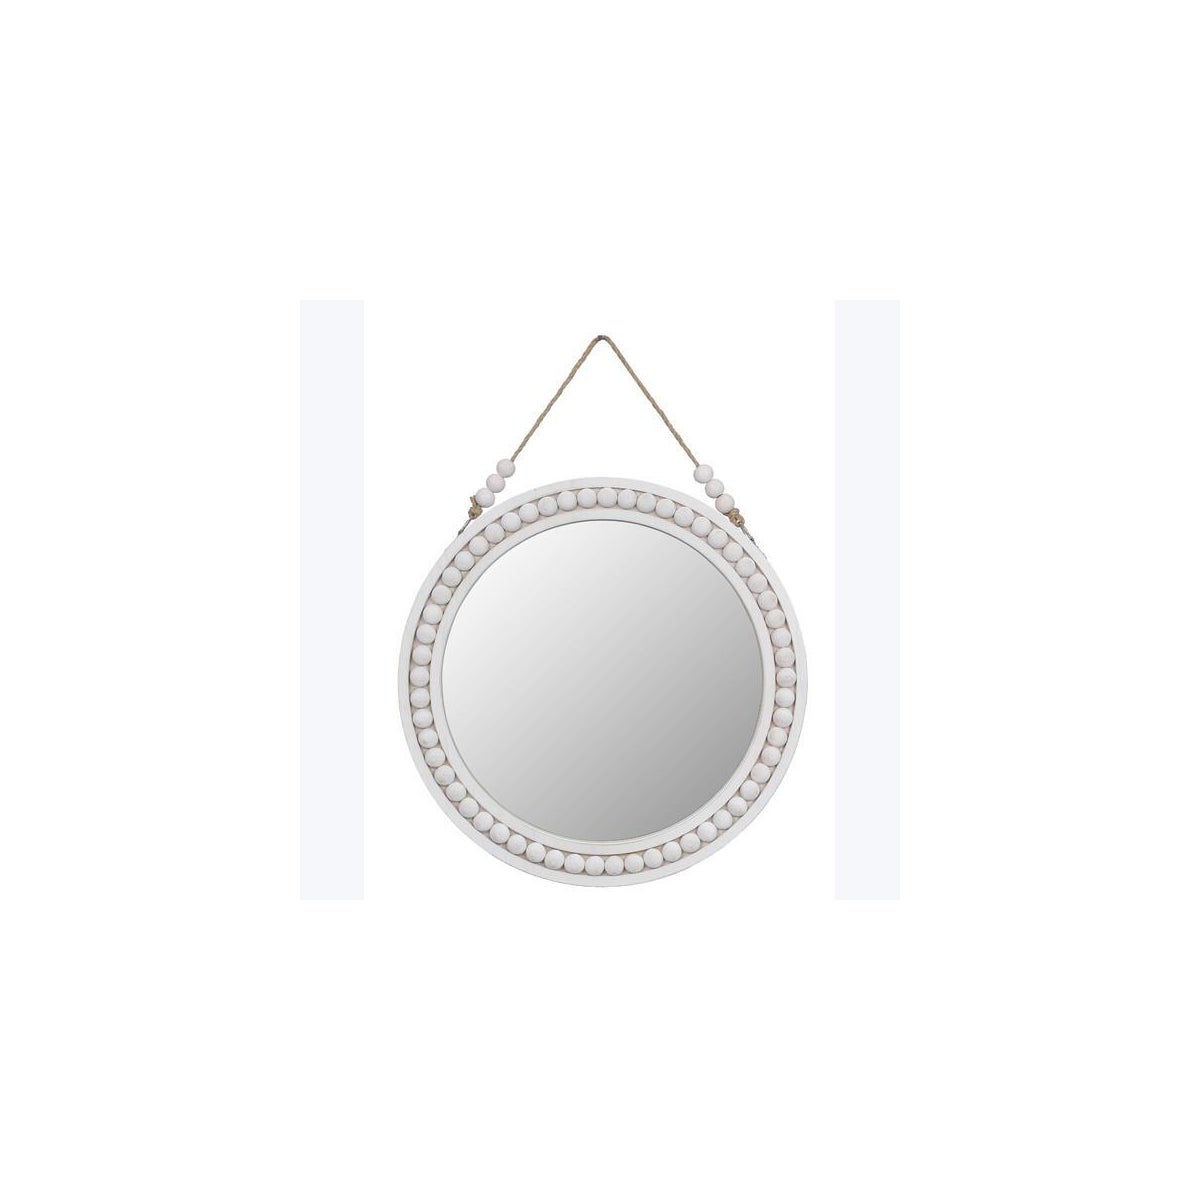 12 Round Mirror with Beaded Wood Frame with Rope